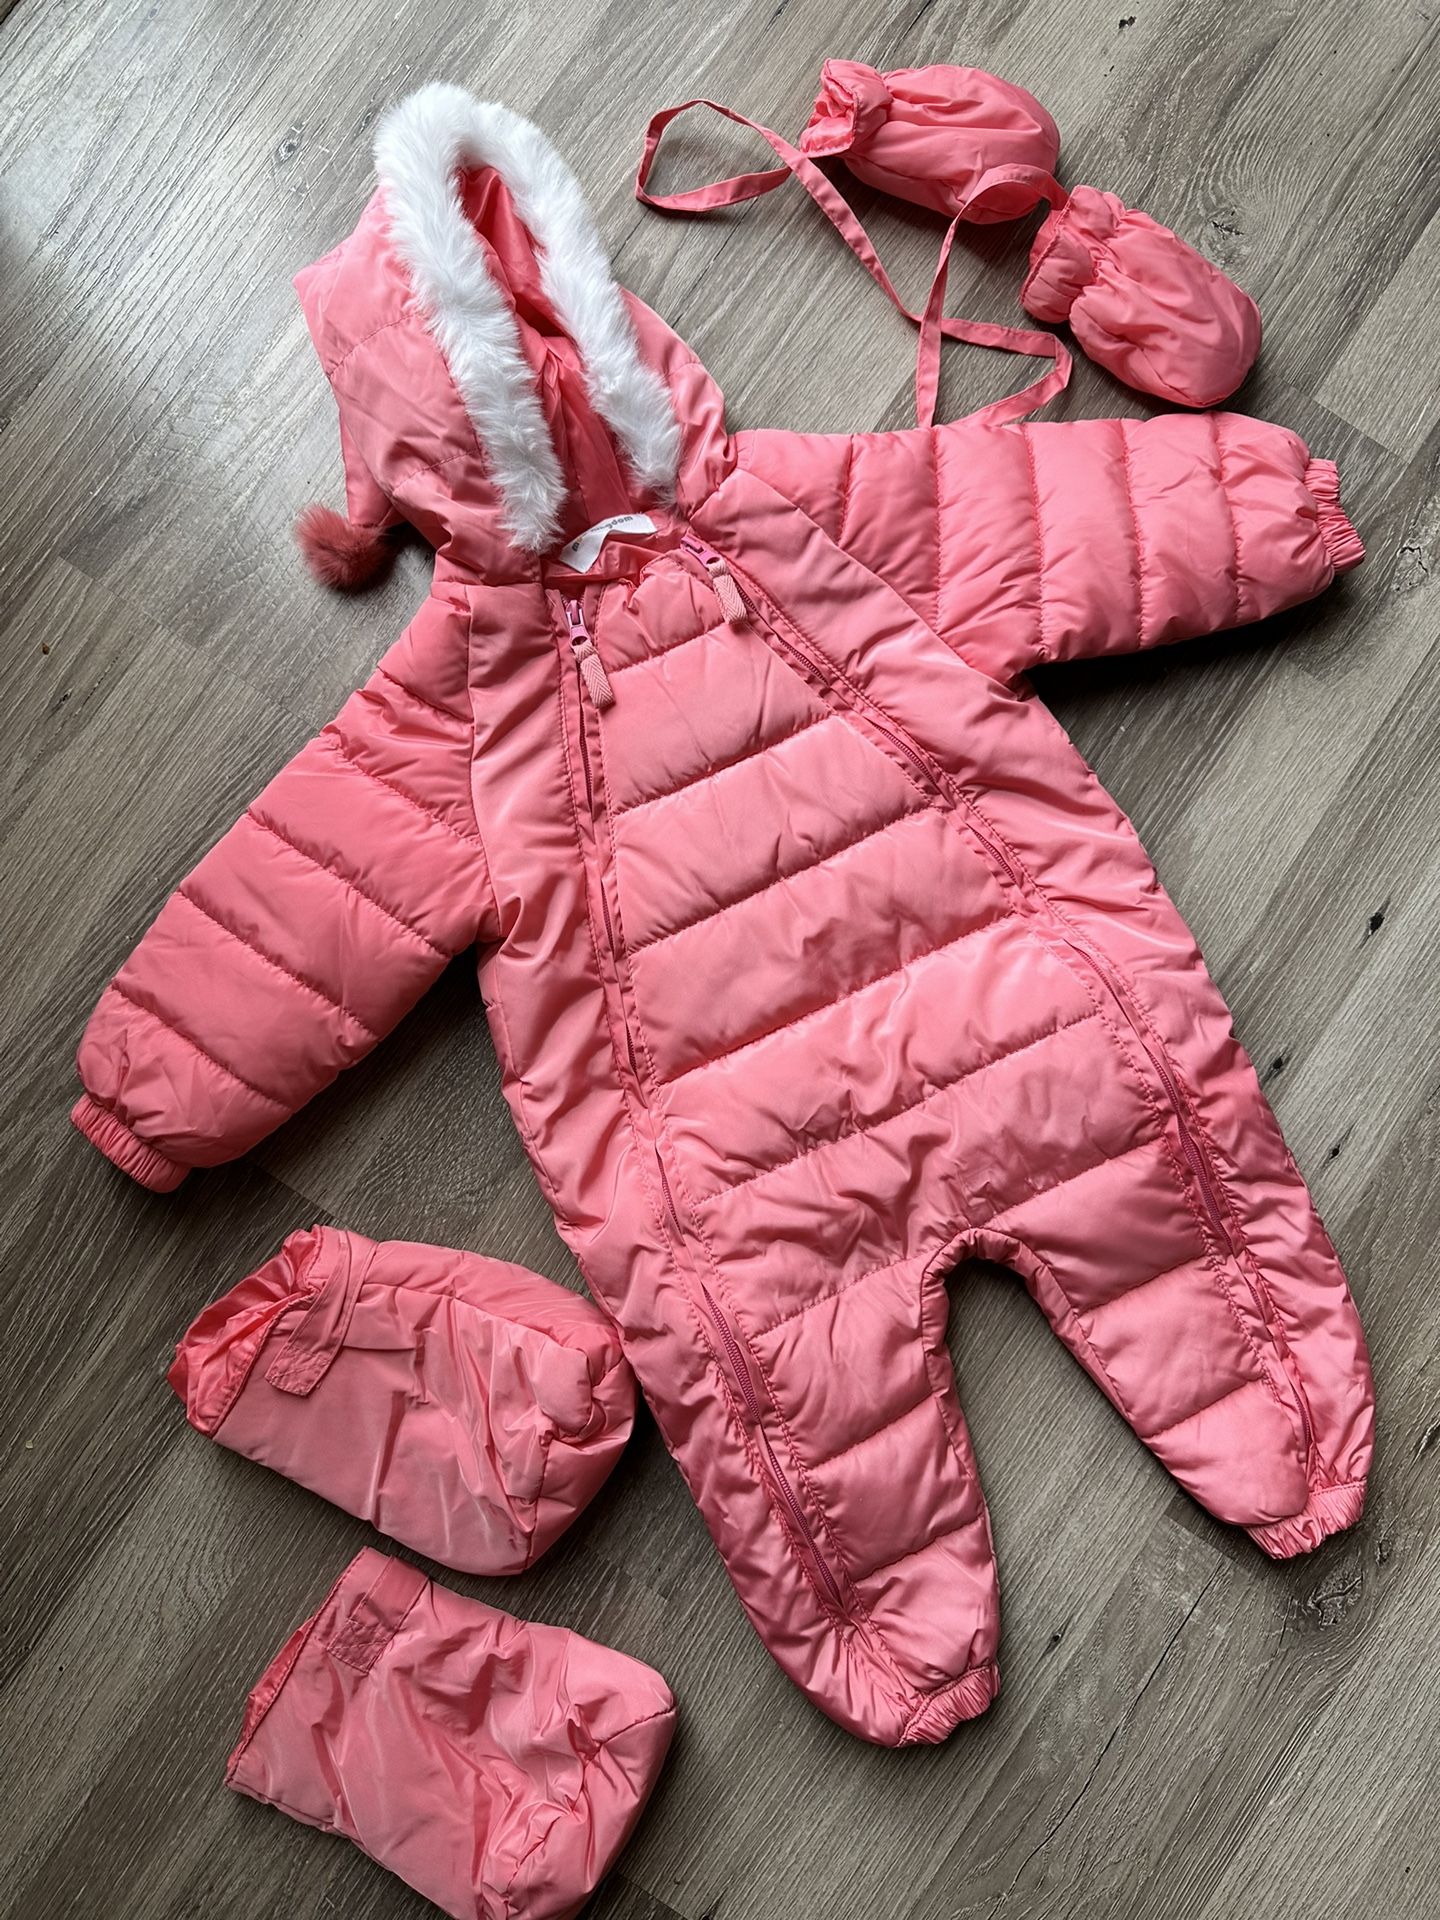 Baby Girl Pink Snow Suit! (Size 6-12 Months)